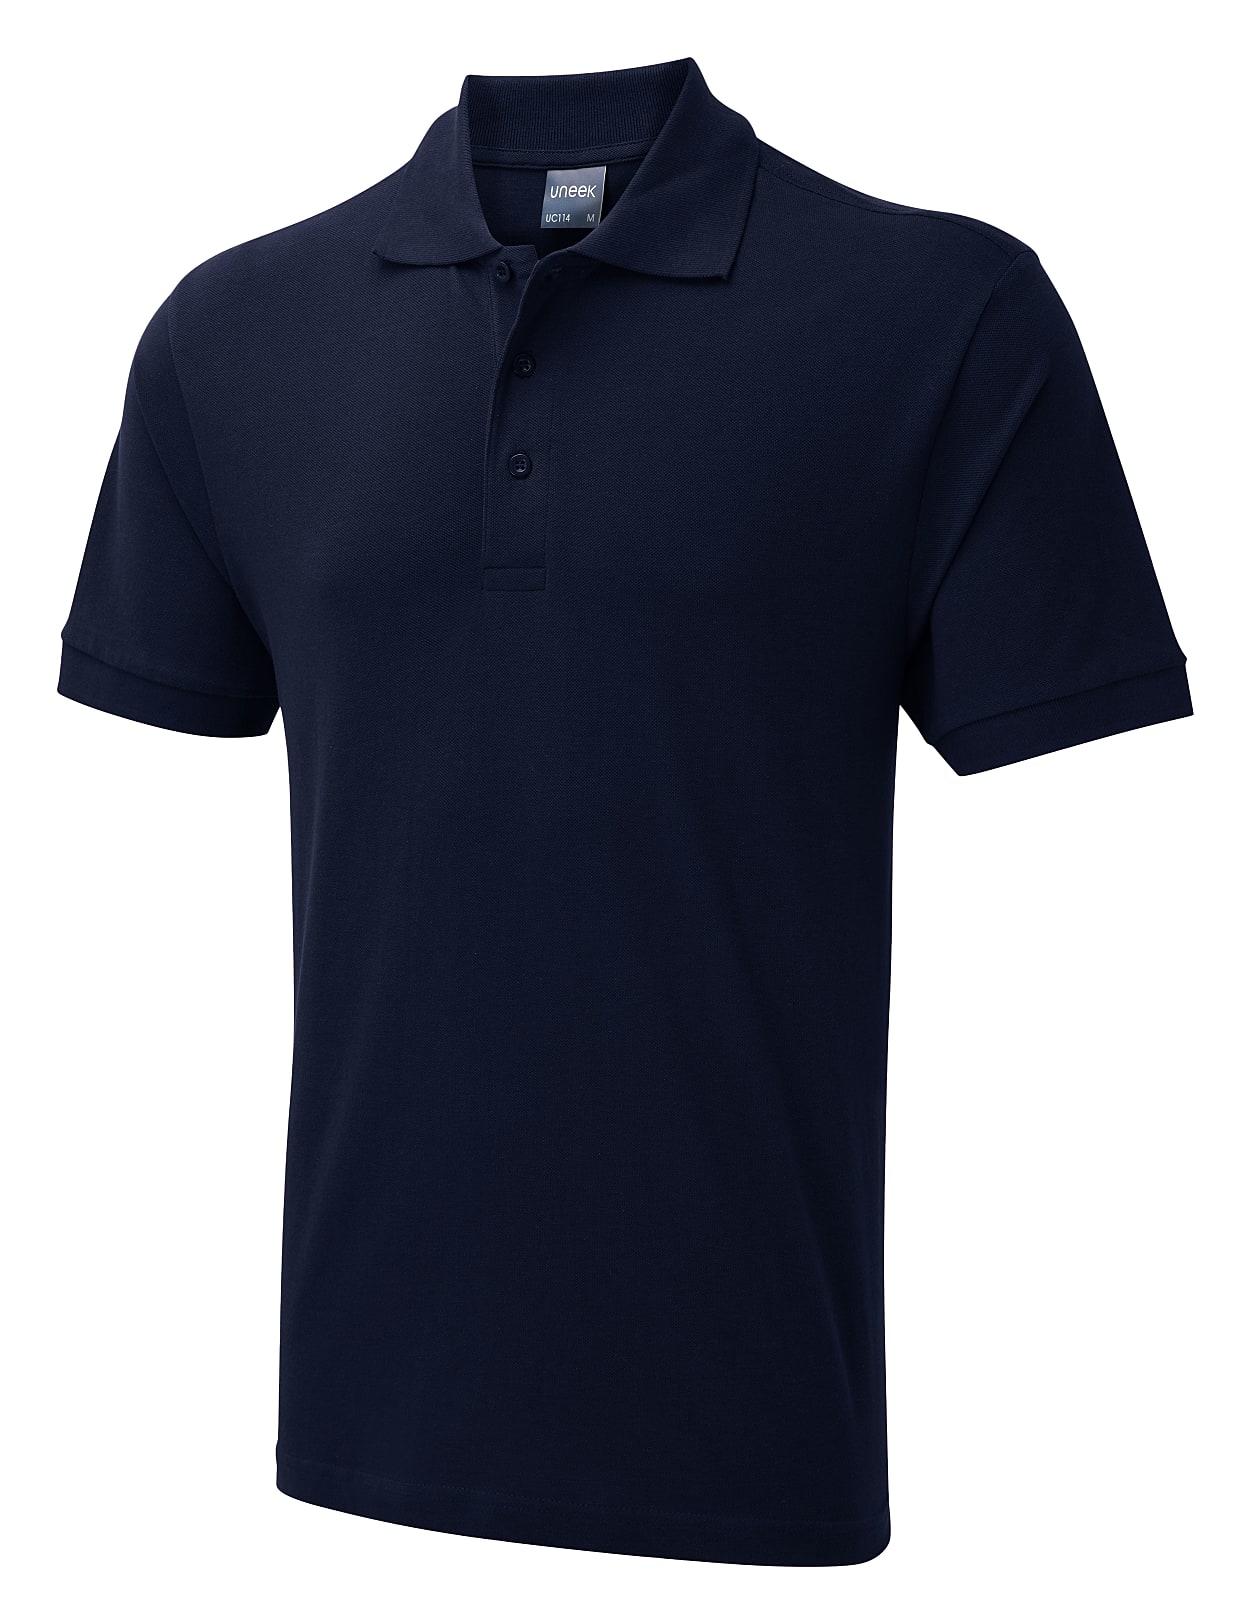 Uneek 180GSM Mens Polo Shirt in Navy (Product Code: UC114)